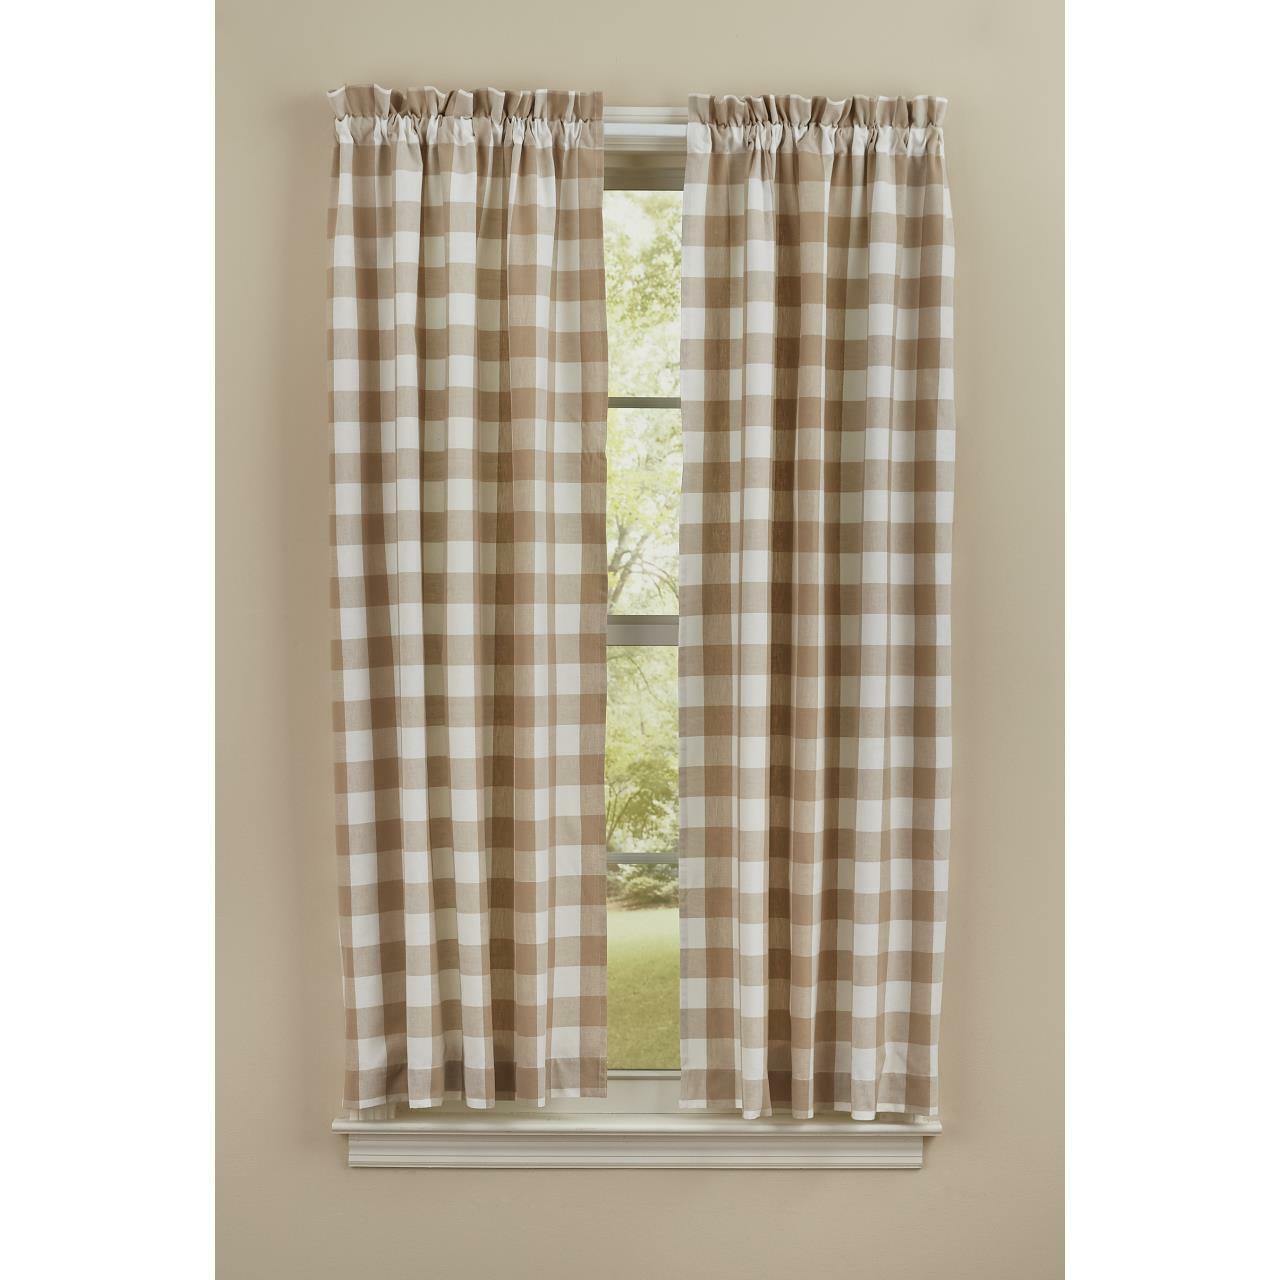 Wicklow Check Curtain Panels - Natural 72x63 Unlined Park Designs - The Fox Decor